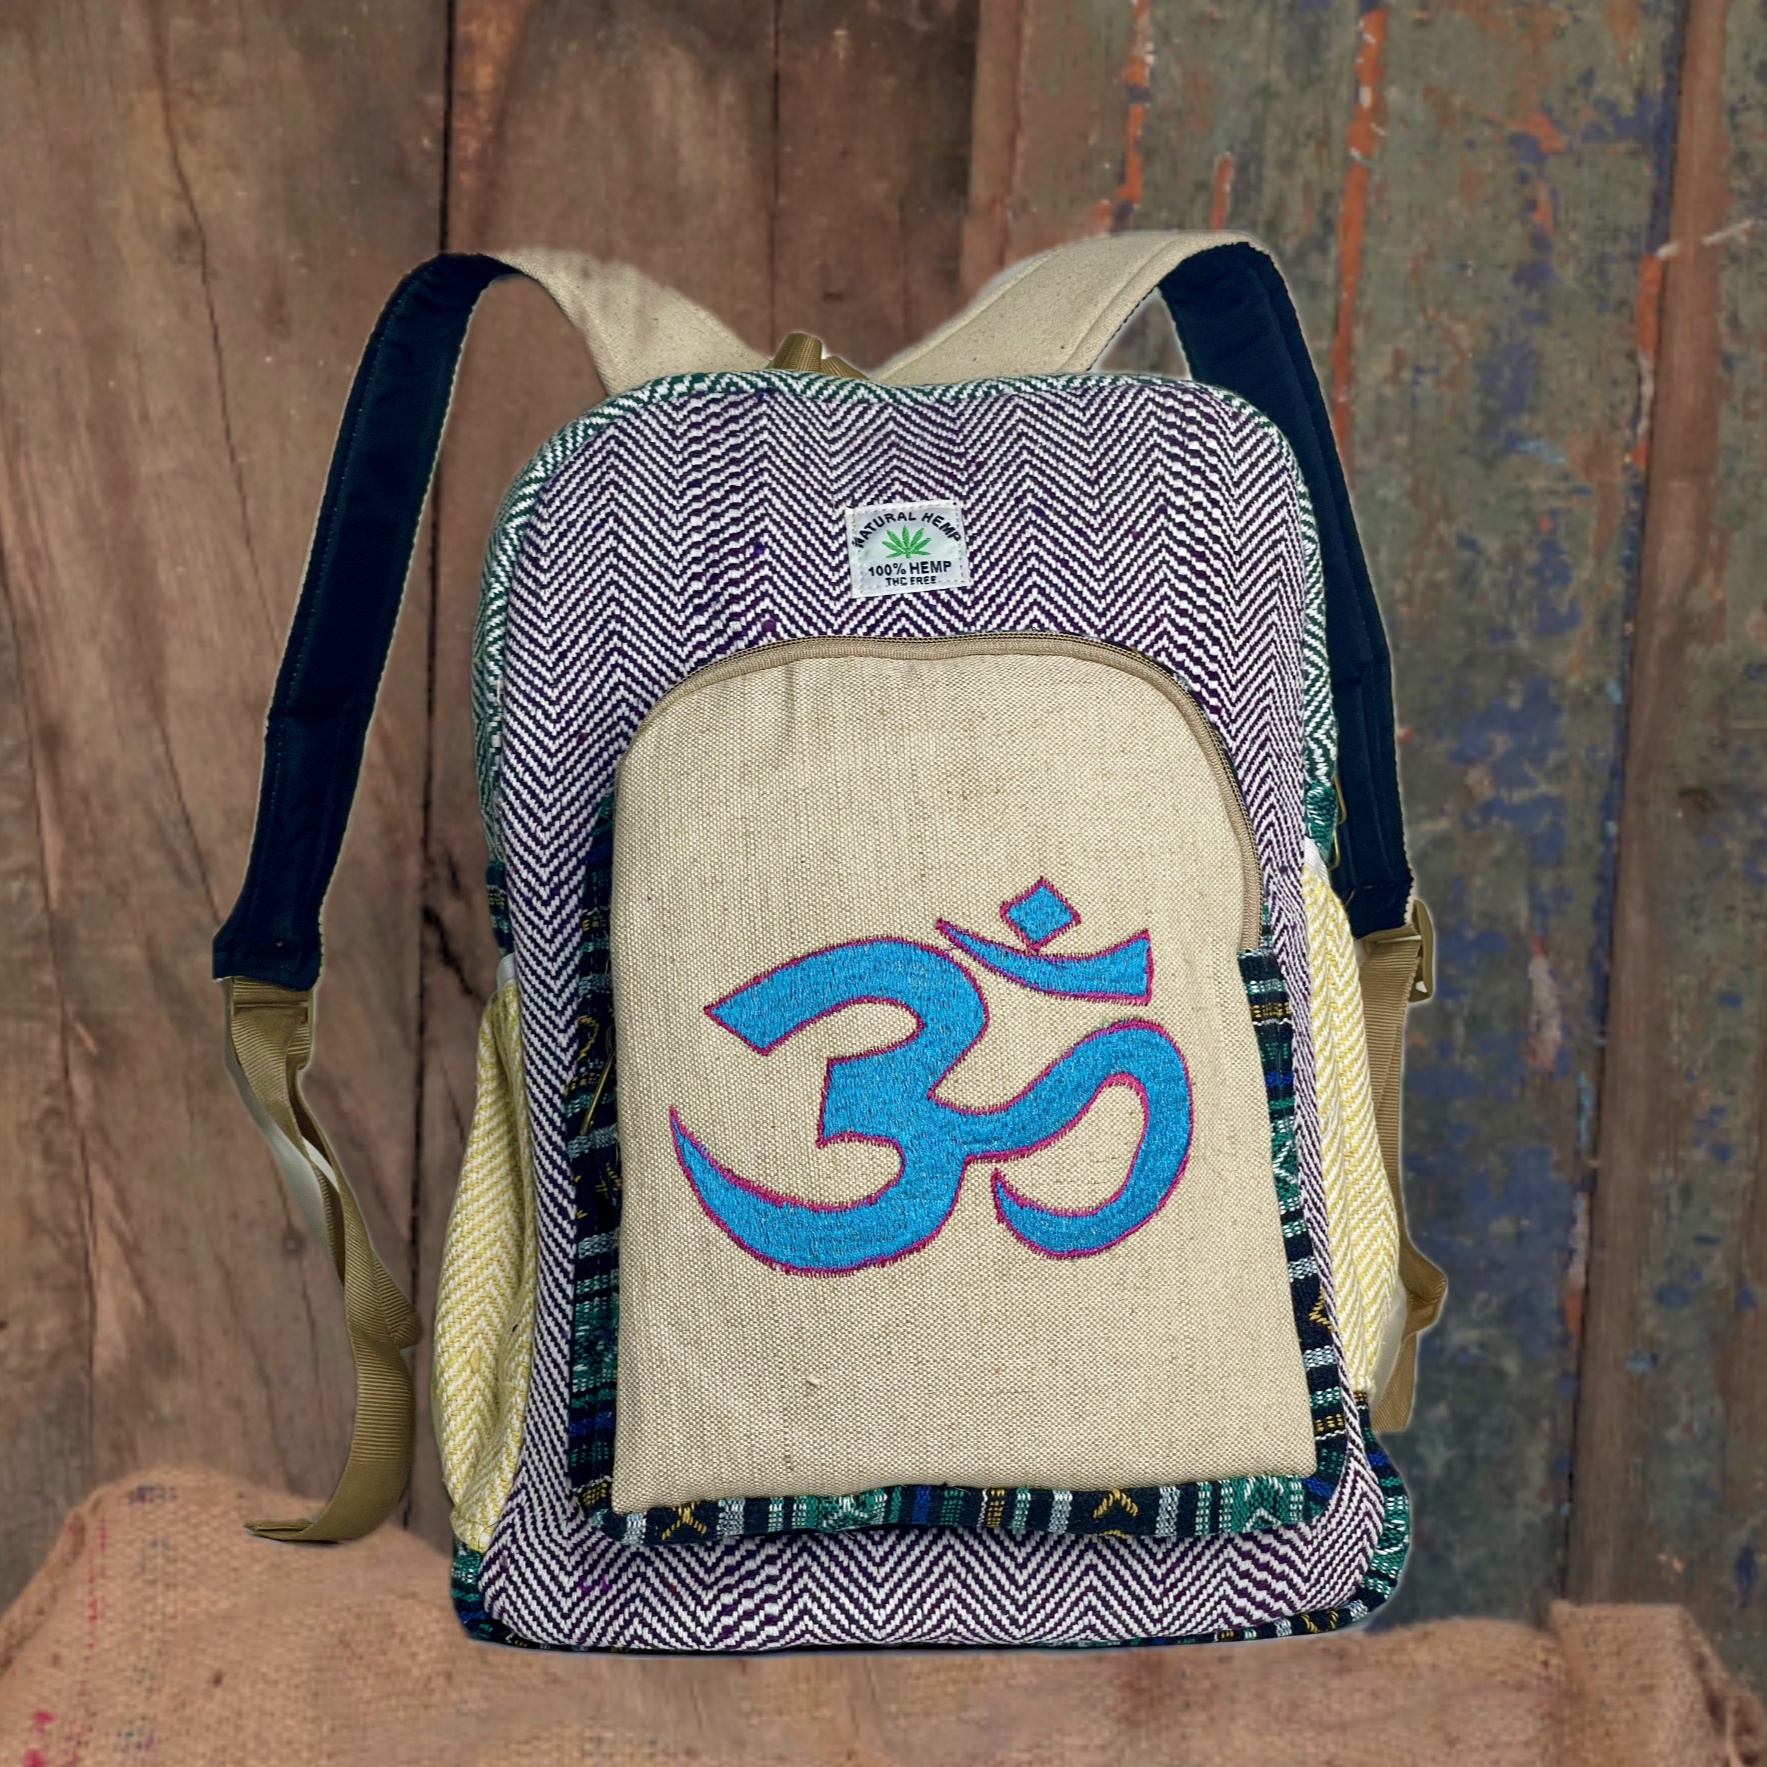 Om Printed HEMP Backpack BACKPACK- 48 L Laptop Office/School/Travel Backpack- Fits Up to 17.3 Inch Laptop Notebook (Both Male and Female)